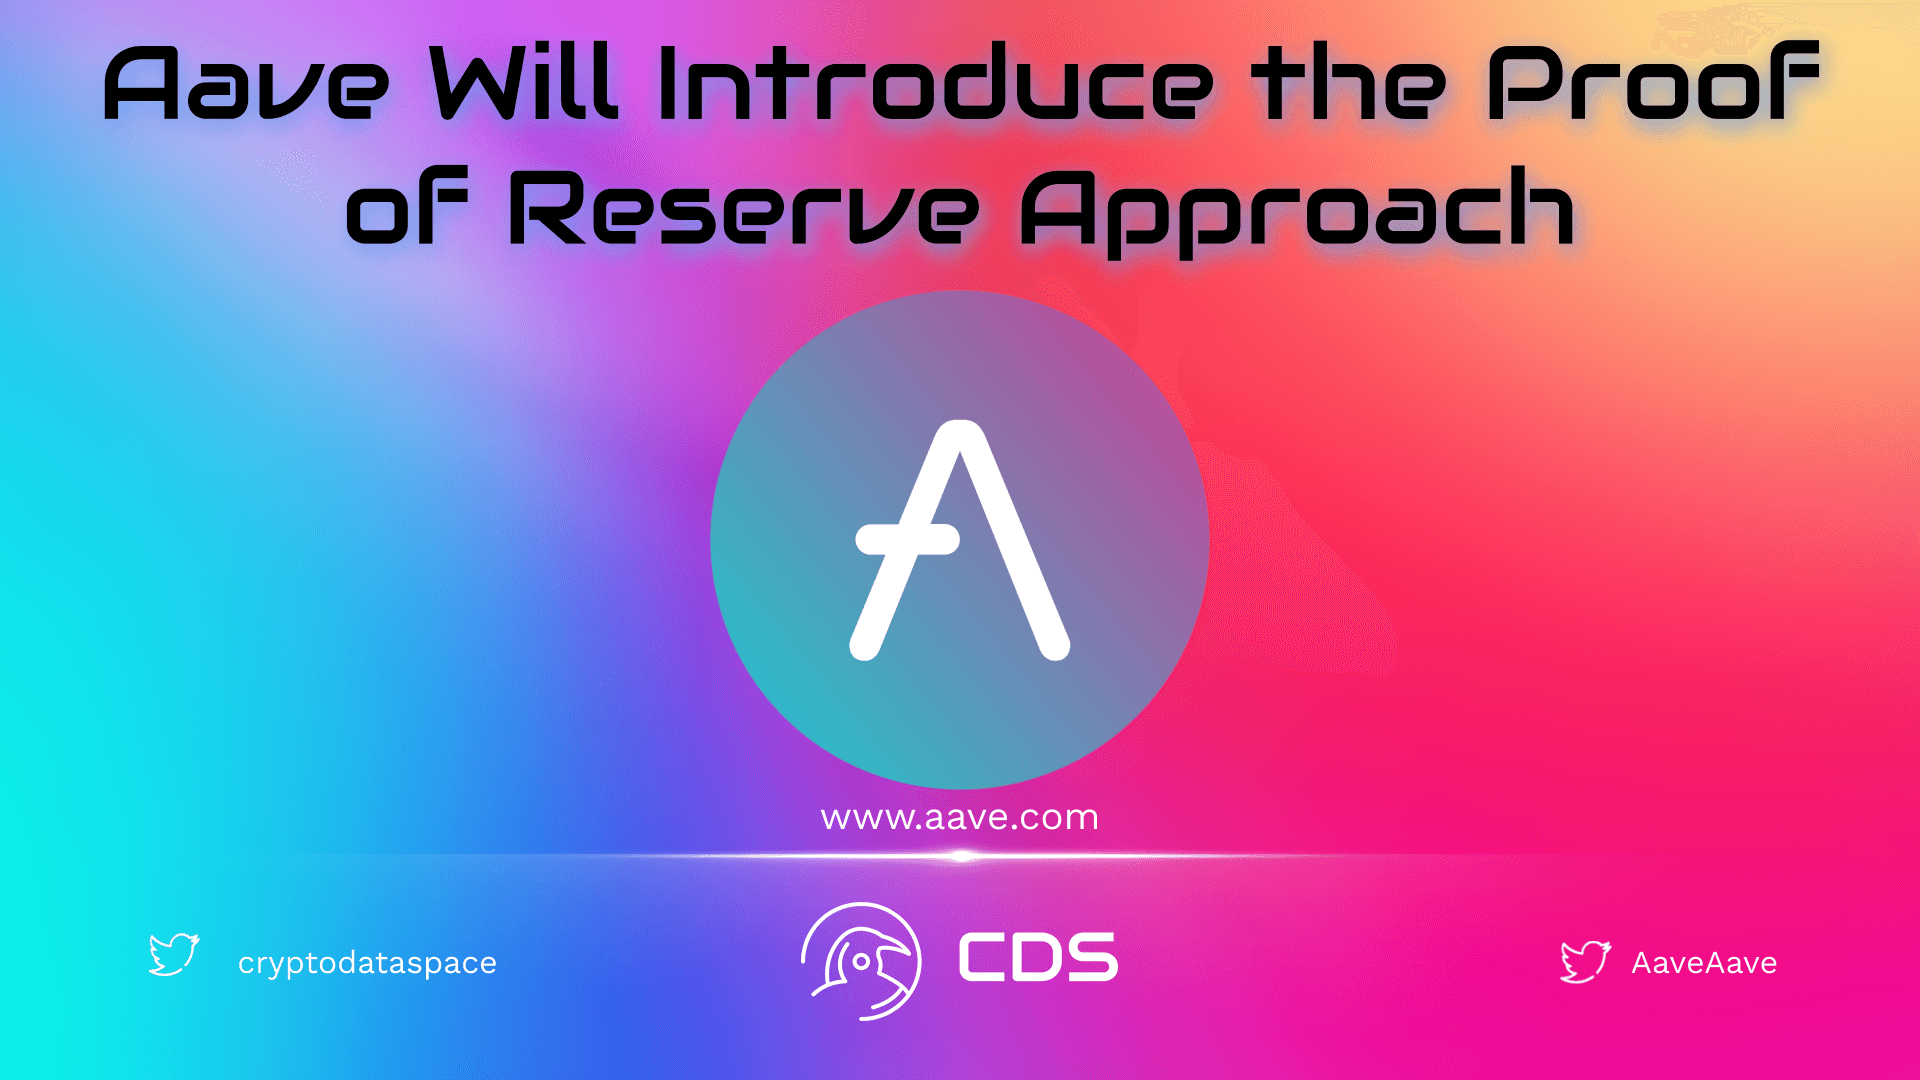 Aave Will Introduce the Proof of Reserve Approach